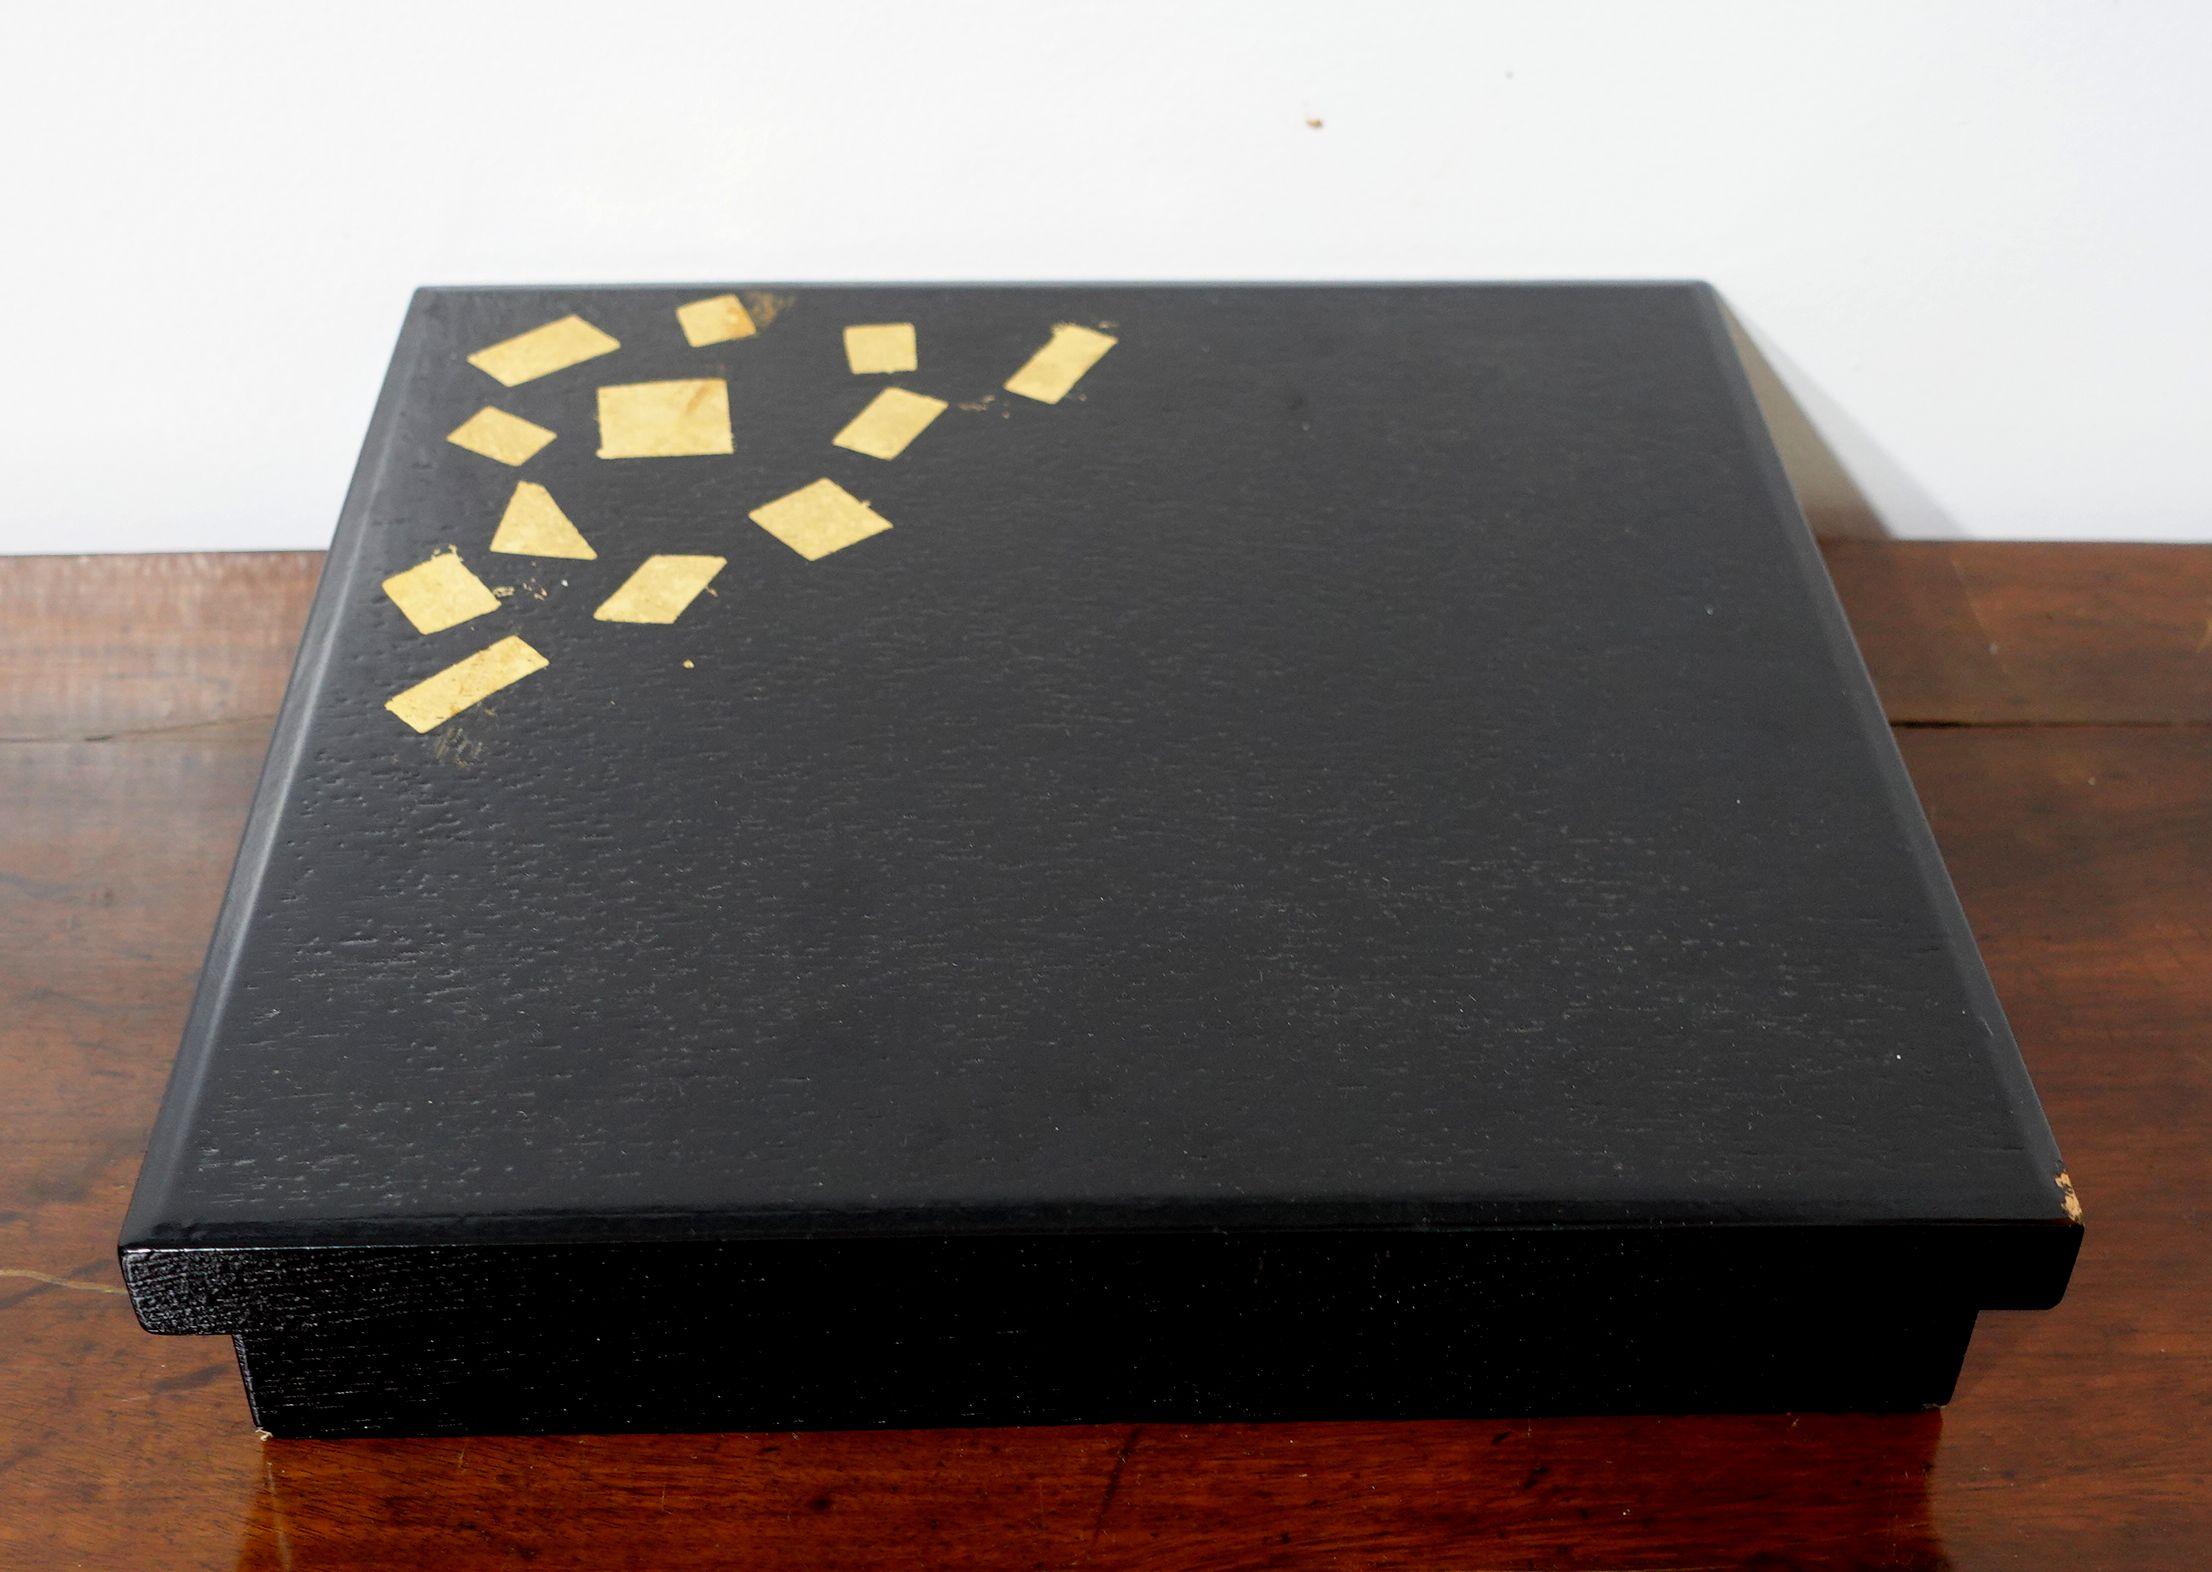 Japan, late Meiji period or later, a large black square organizer box and cover, decorated with geometric squares in gold on the cover